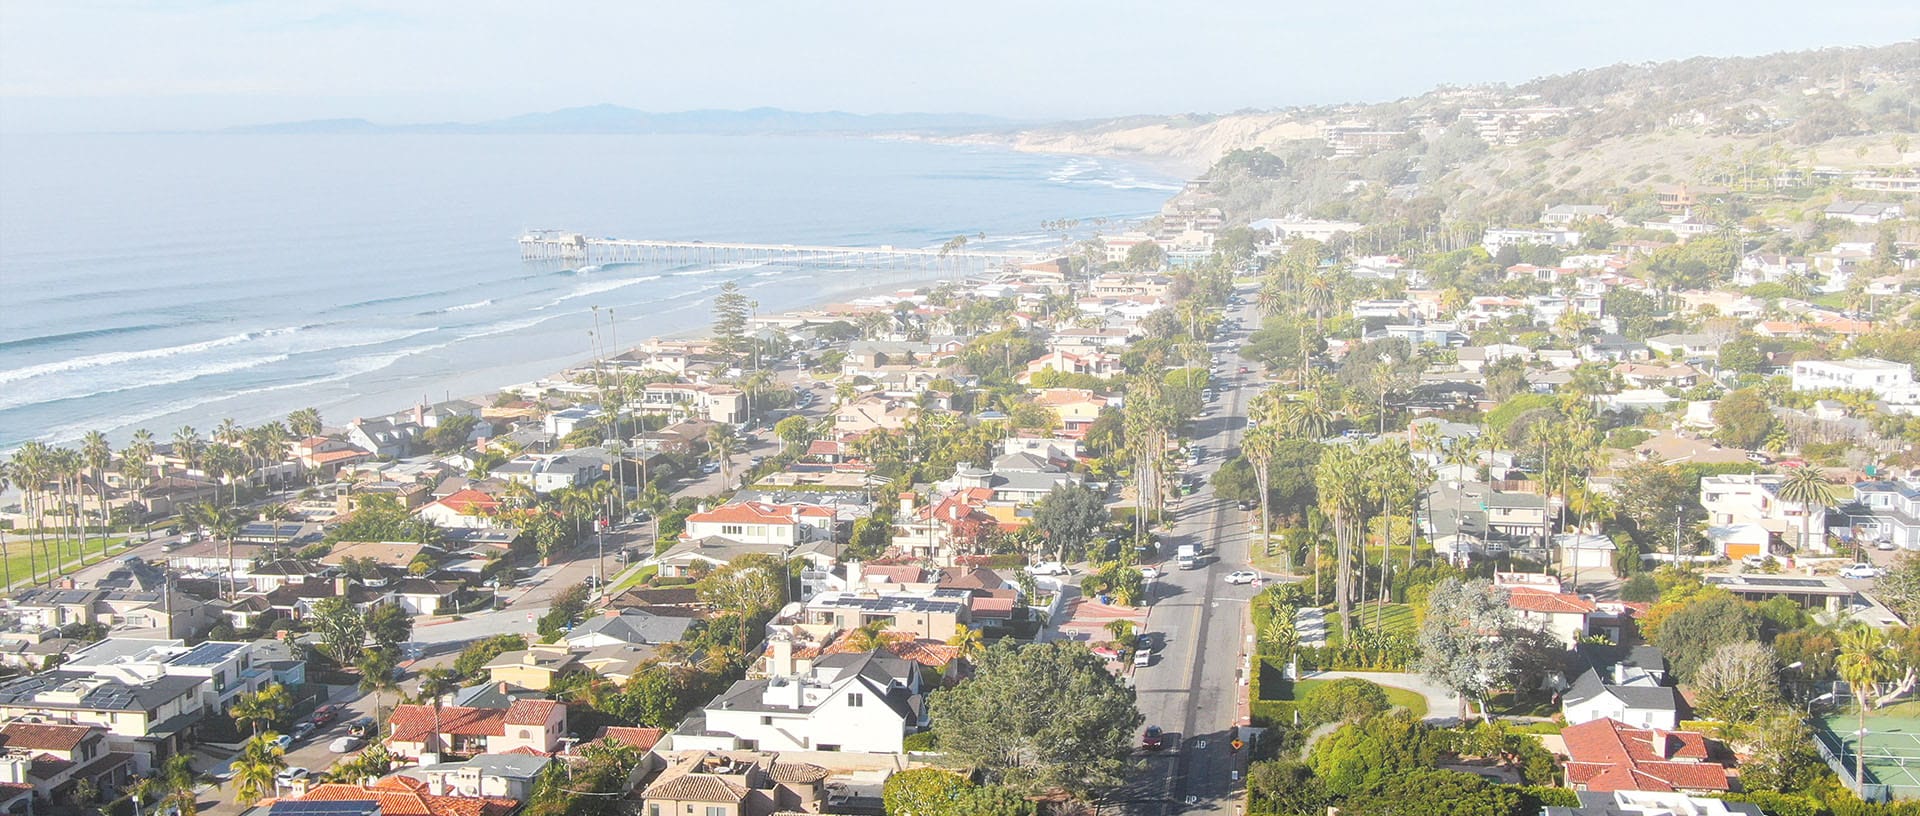 an aerial coastal view of San Diego, California during the daytime